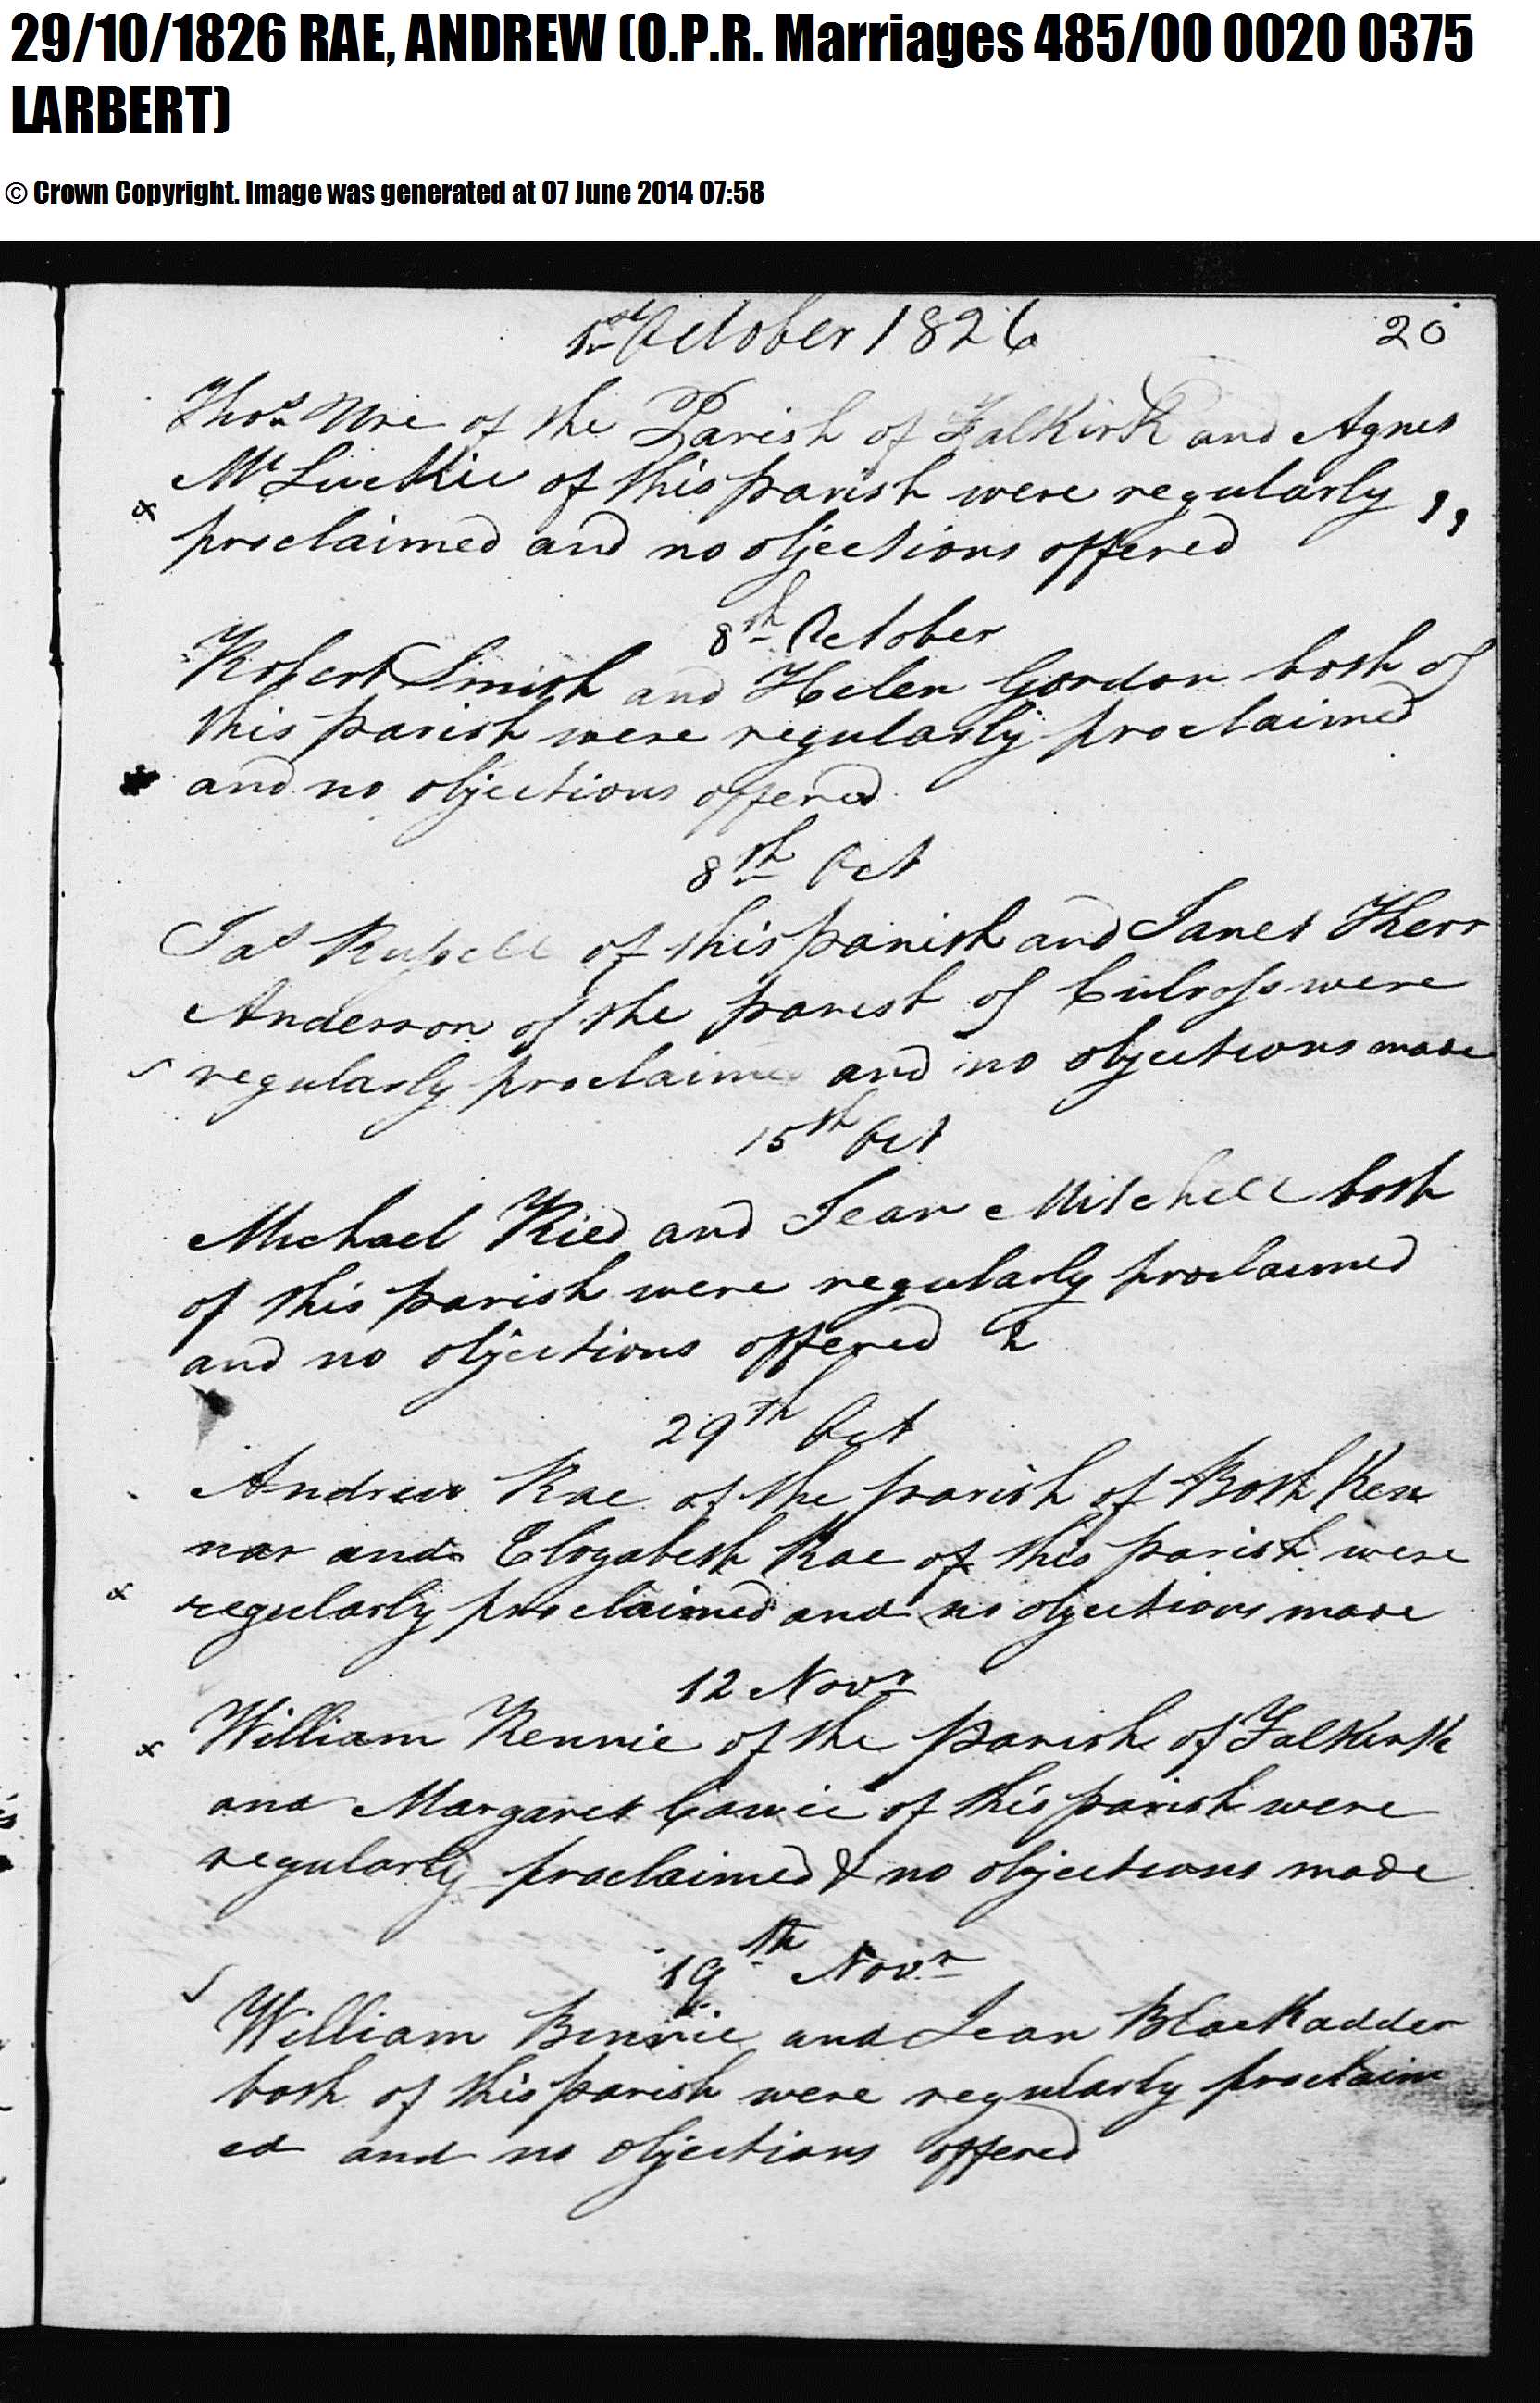 1826 Marriage of Andrew Rae and Elizabeth Rae